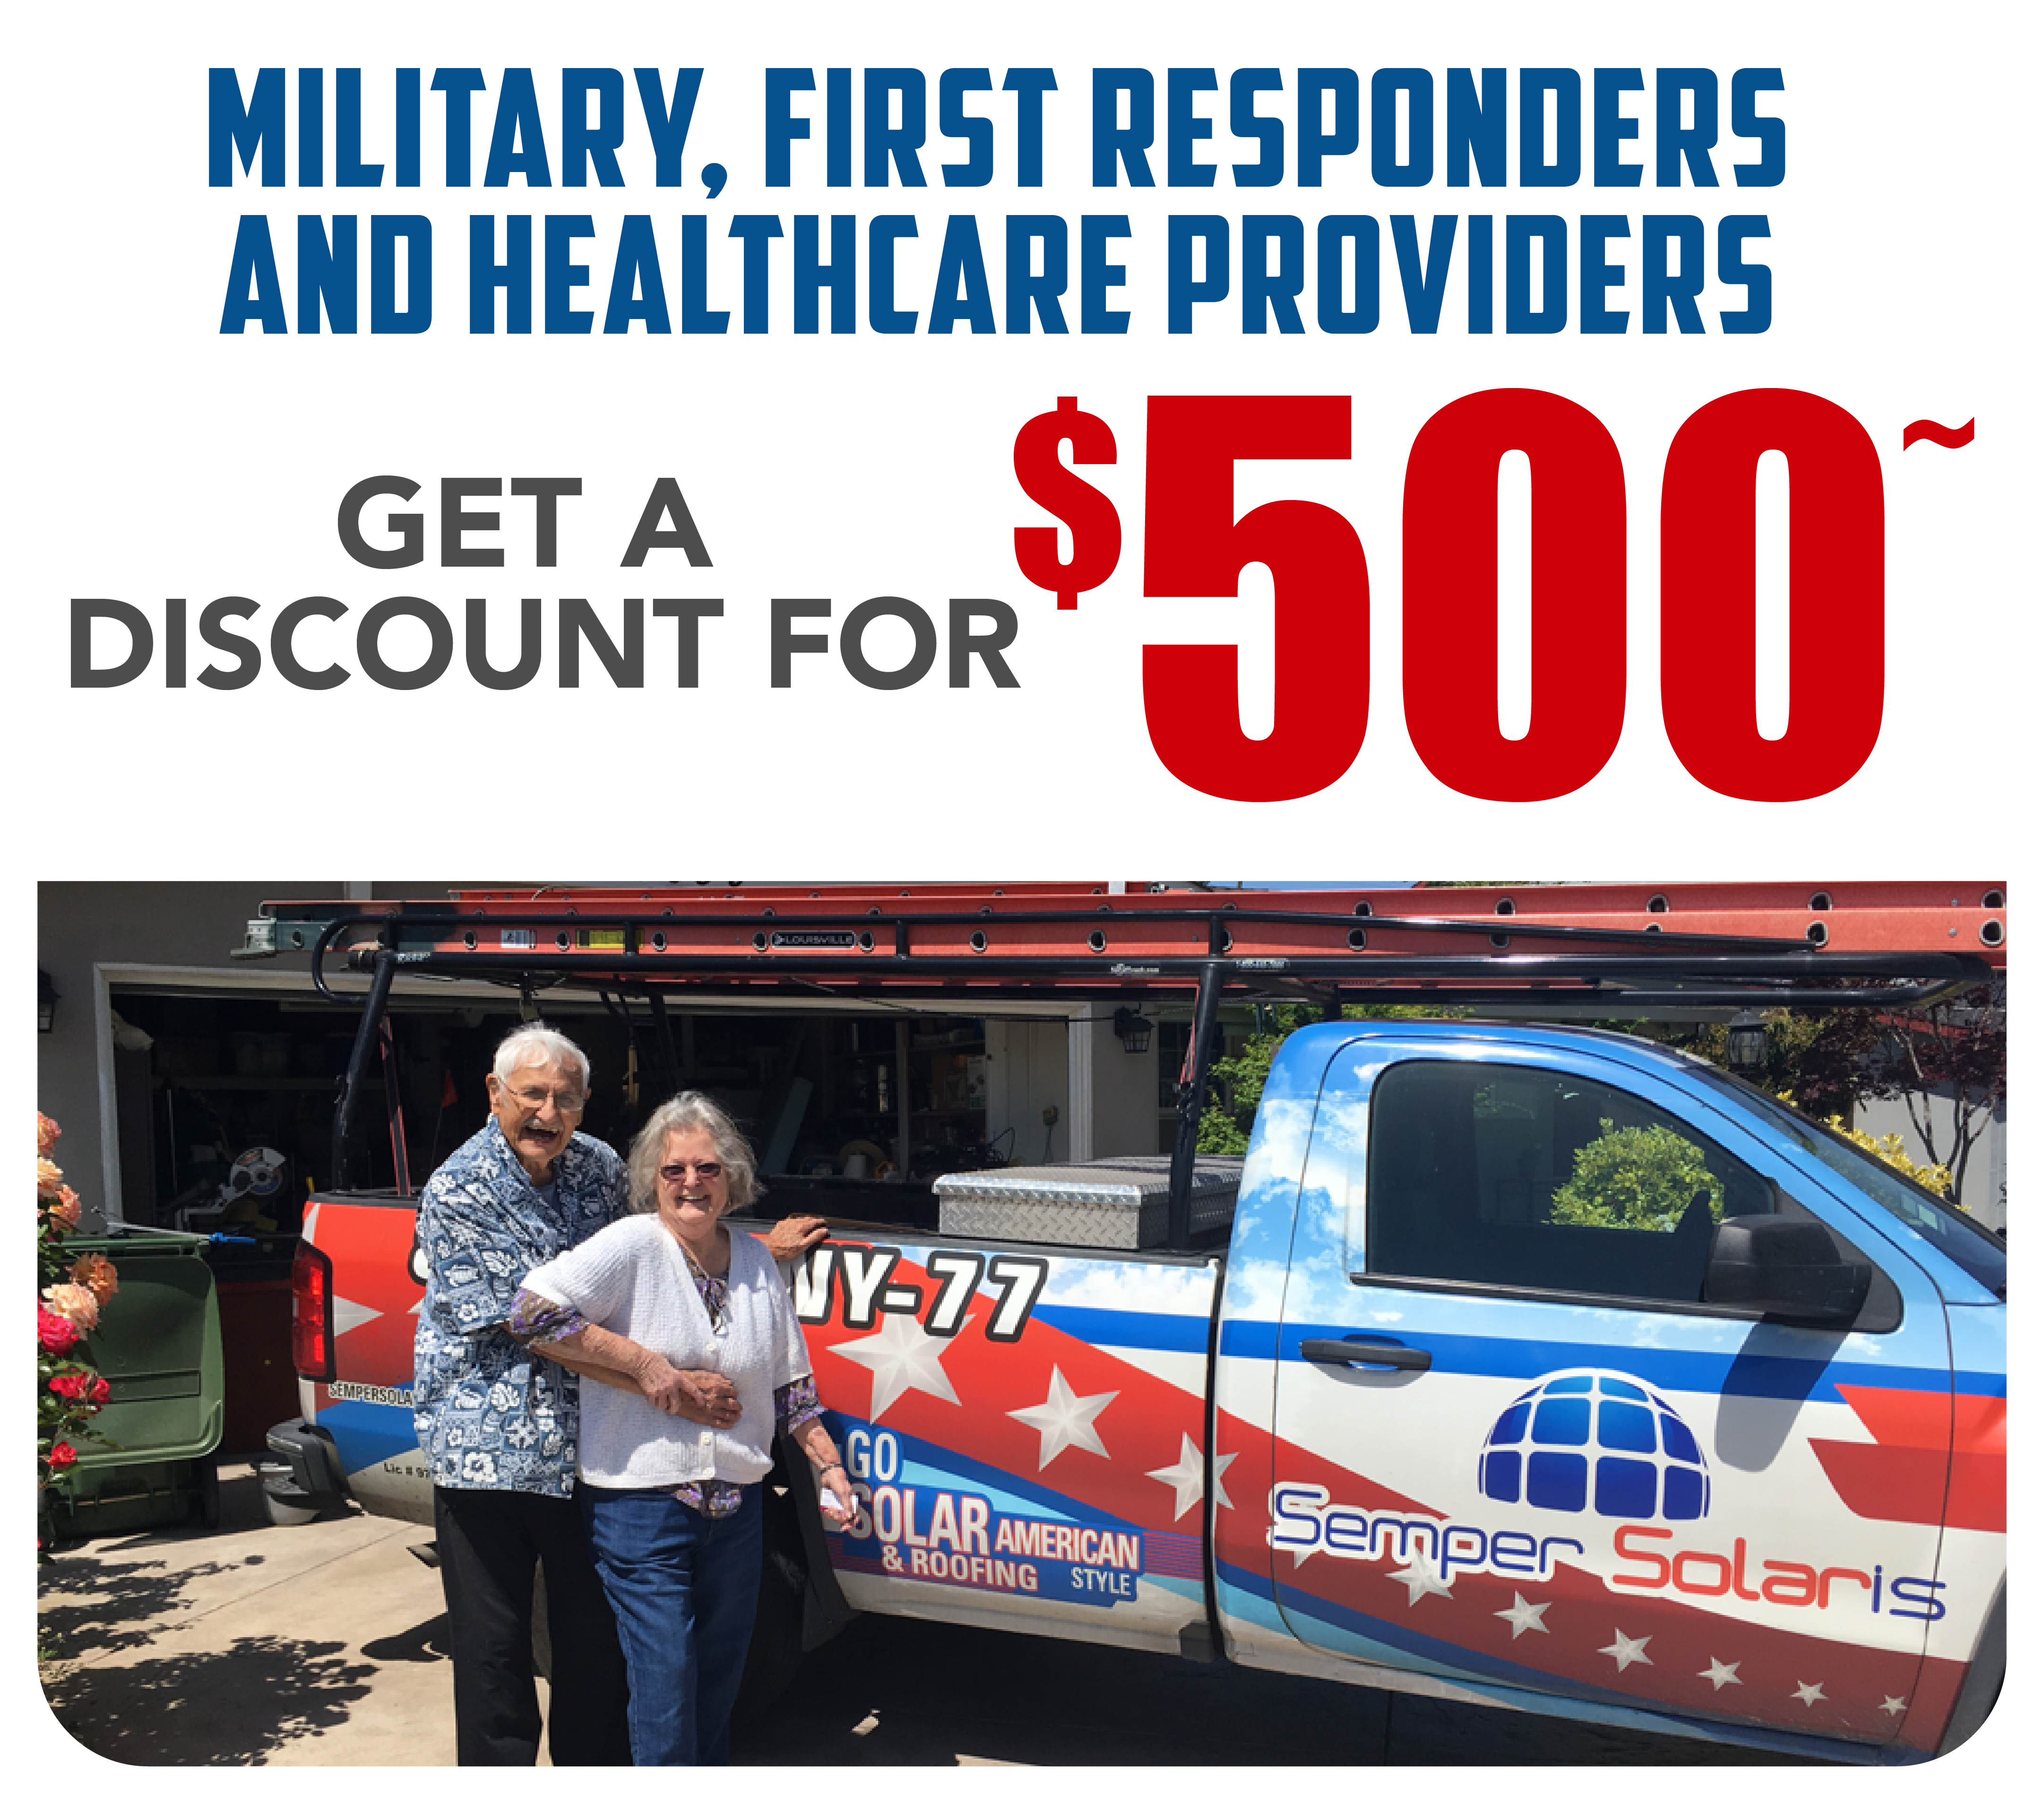 $500 off for military, first responders and healcare providers